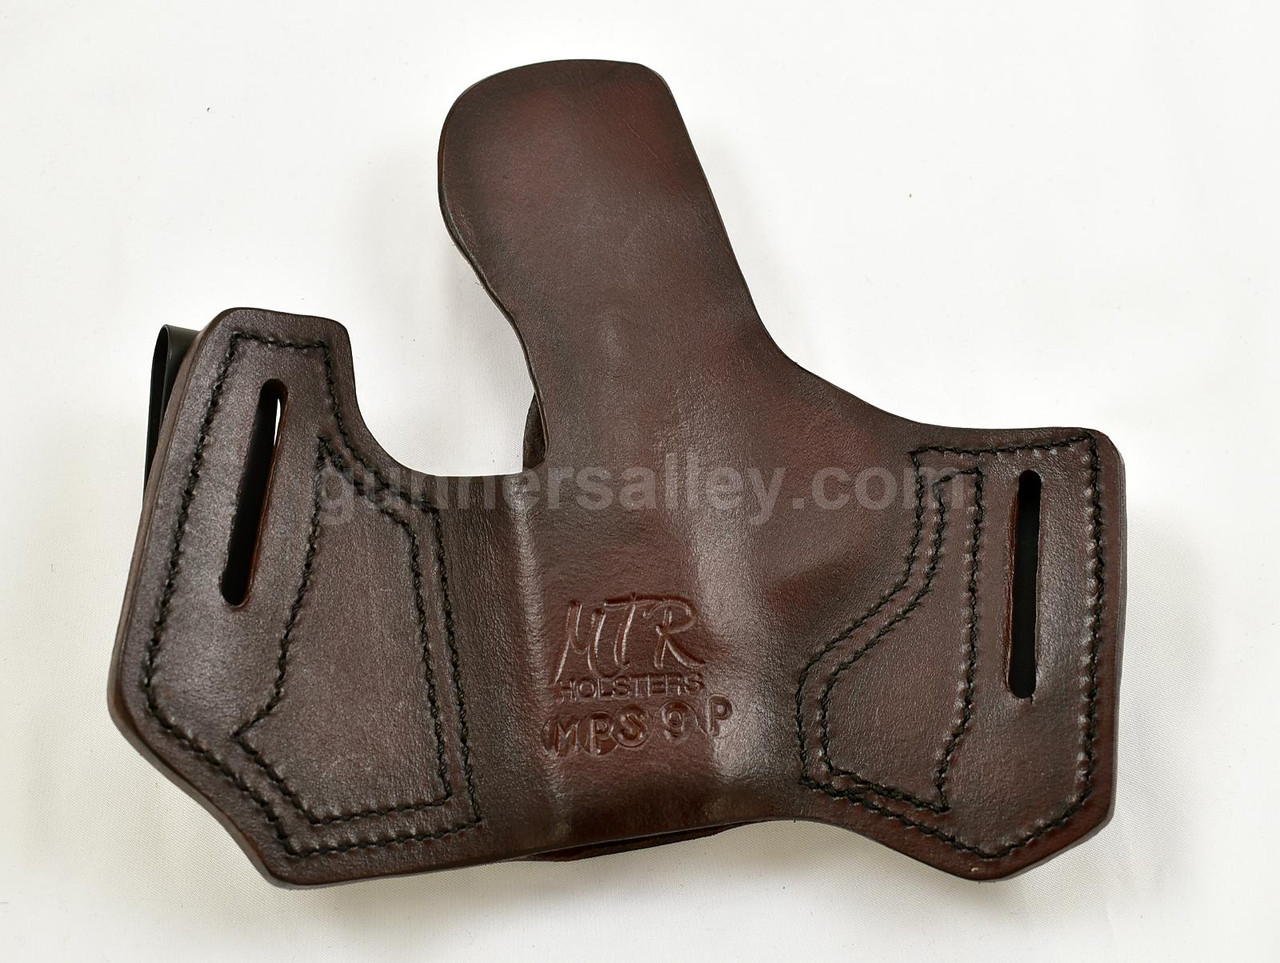 RH Mahogany MTR Custom Dual Carry Holster with an Optic Cutout for a S&W M&P Shield Plus without a Safety - Front View